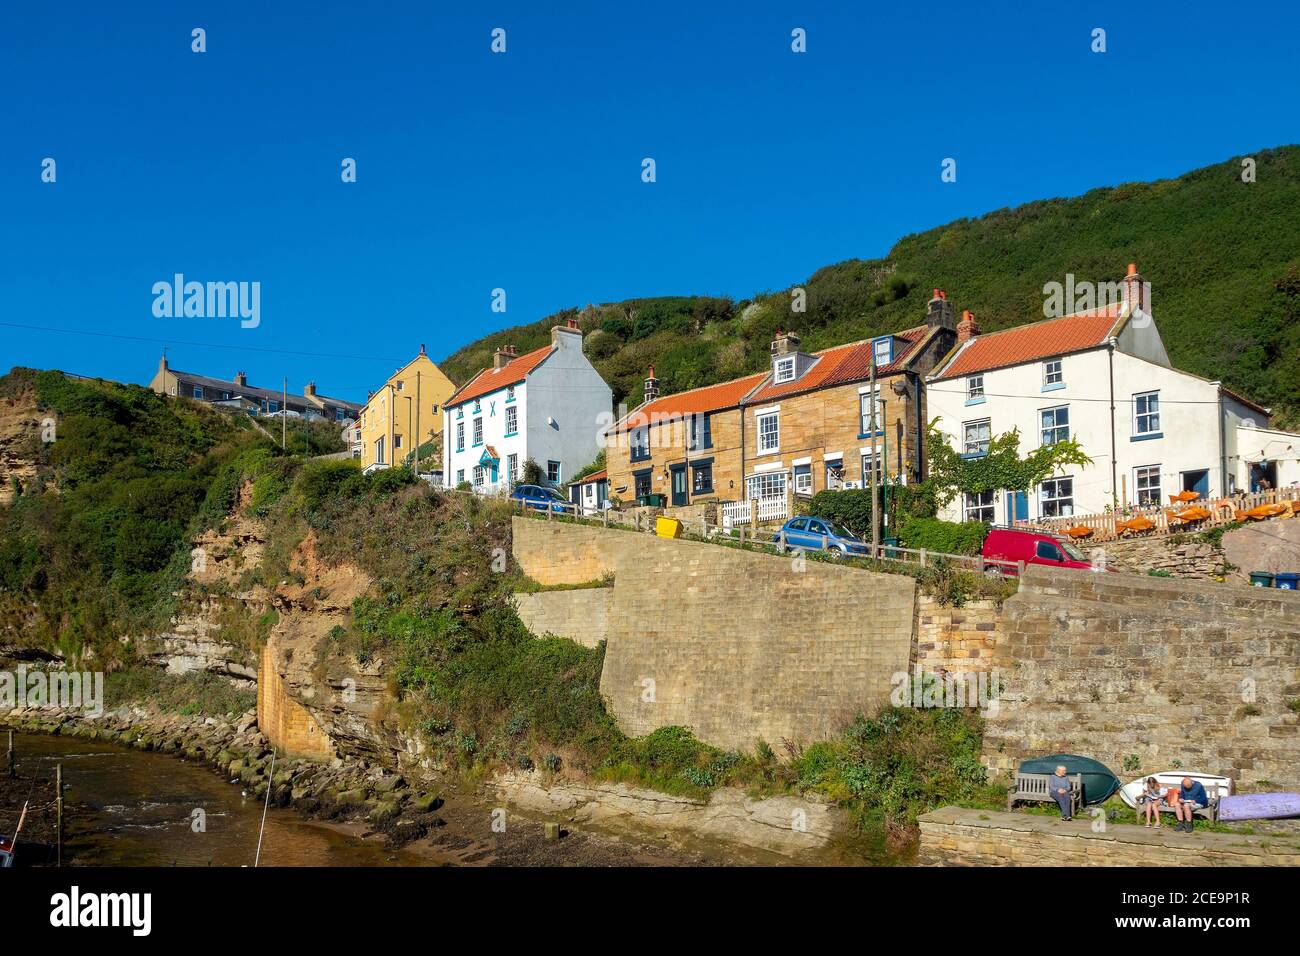 People sitting in the summer sunshine below the houses on the steep hill at Cowbar, Staithes on the North Sea Coastal path and Cleveland Way l Stock Photo